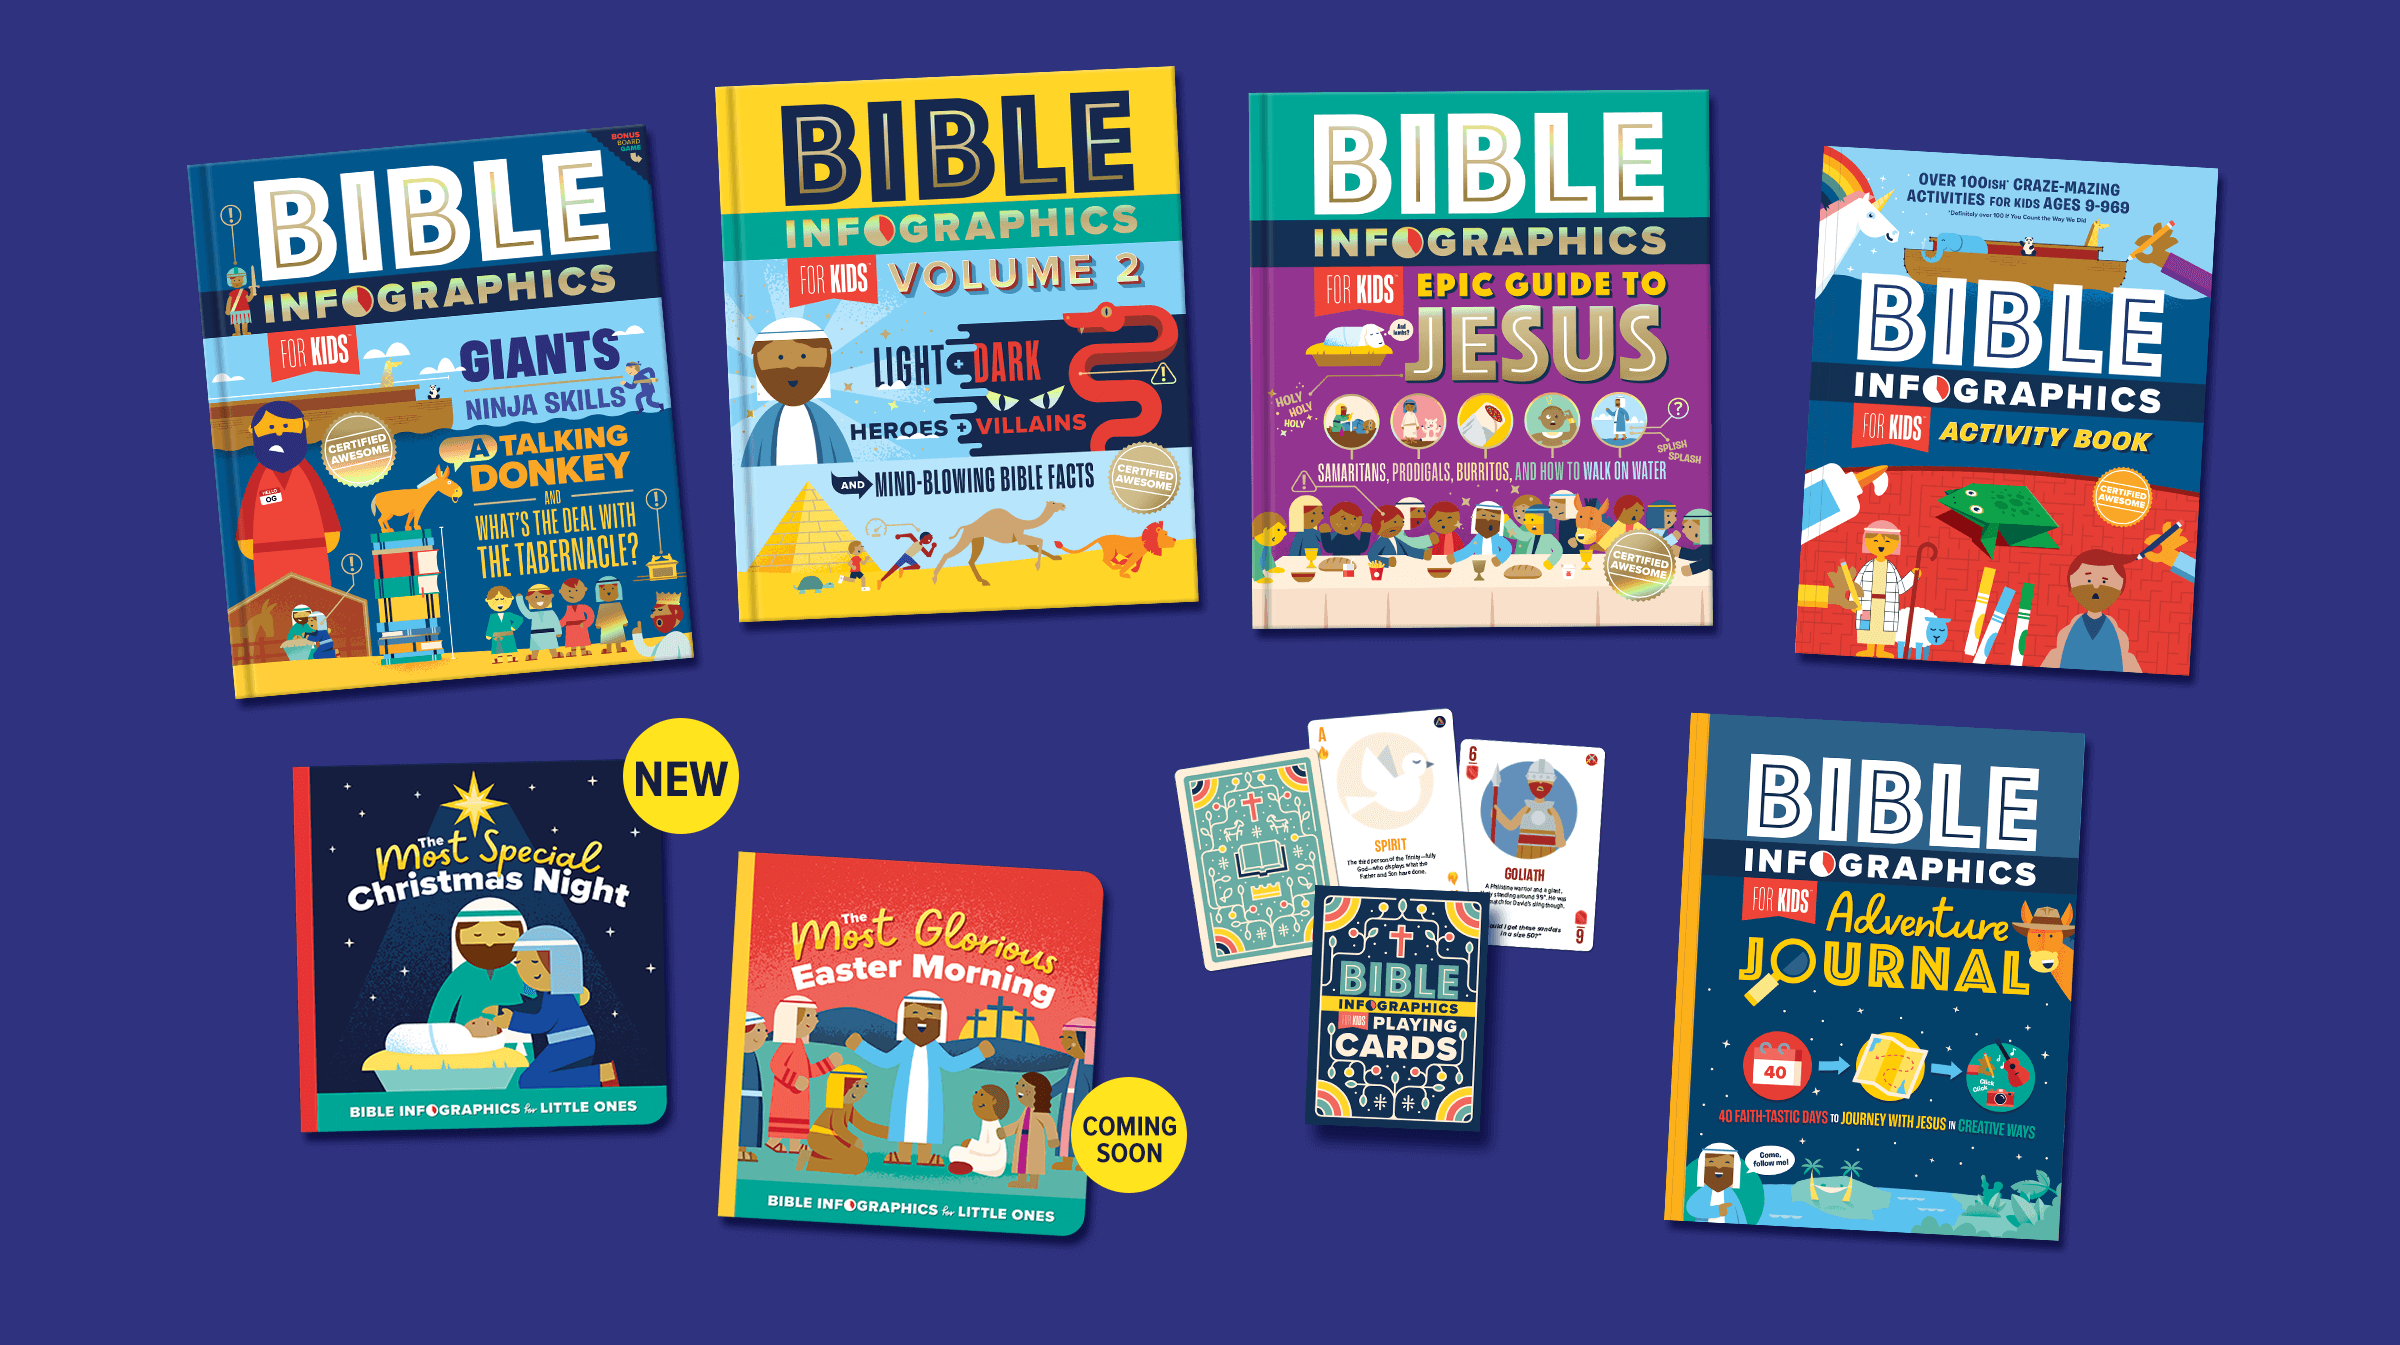 The Bible Infographic for Kids Series